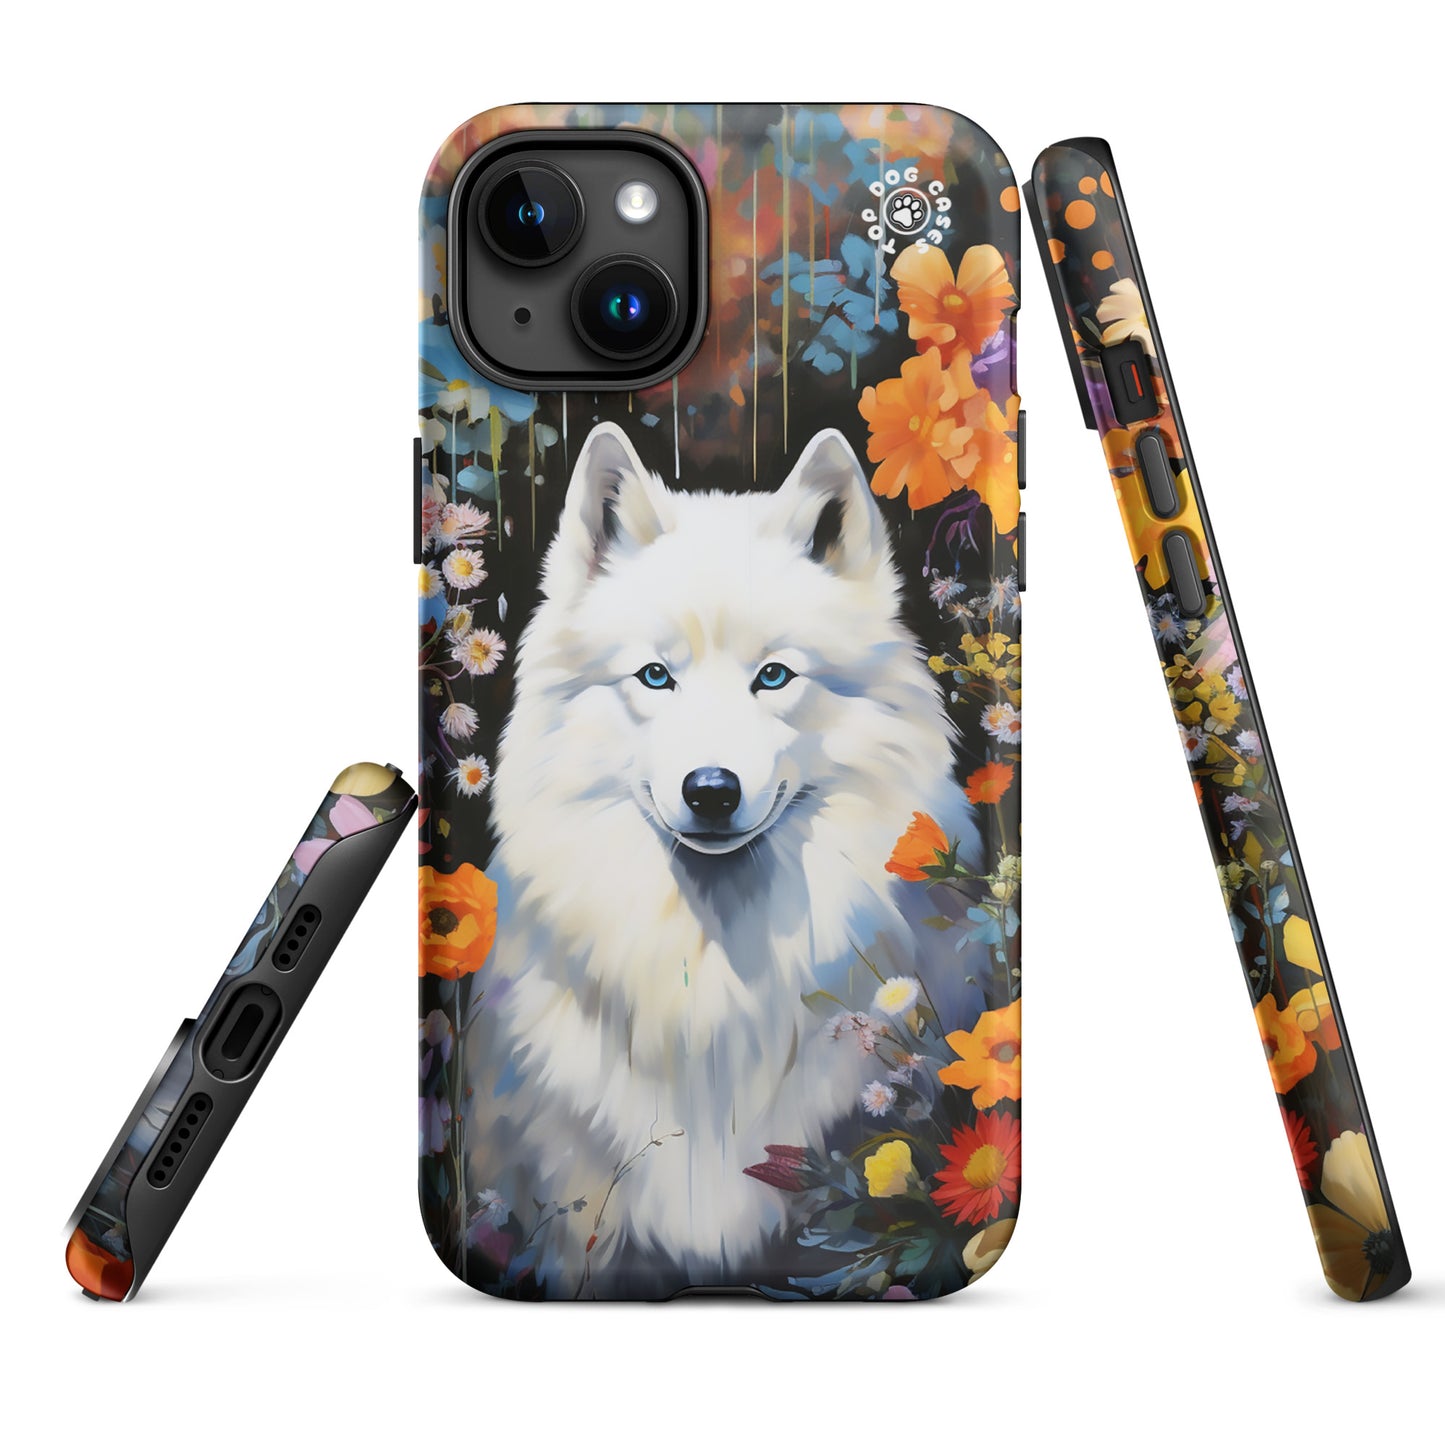 White Siberian Husky - iPhone Case - Aesthetic Phone Cases - Top Dog Cases - #CuteDog, #CuteDogs, #Flowers, #Husky, #iPhone, #iPhone11, #iphone11case, #iPhone12, #iPhone12case, #iPhone13, #iPhone13case, #iPhone13DogCase, #iPhone13Mini, #iPhone13Pro, #iPhone13ProMax, #iPhone14, #iPhone14case, #iPhone14DogCase, #iPhone14Plus, #iPhone14Pluscase, #iPhone14Pro, #iPhone14ProMax, #iPhone14ProMaxCase, #iPhone15, #iPhone15case, #iPhonecase, #iphonedogcase, #Siberian Husky, #White Siberian Husky, DogsandFlowers